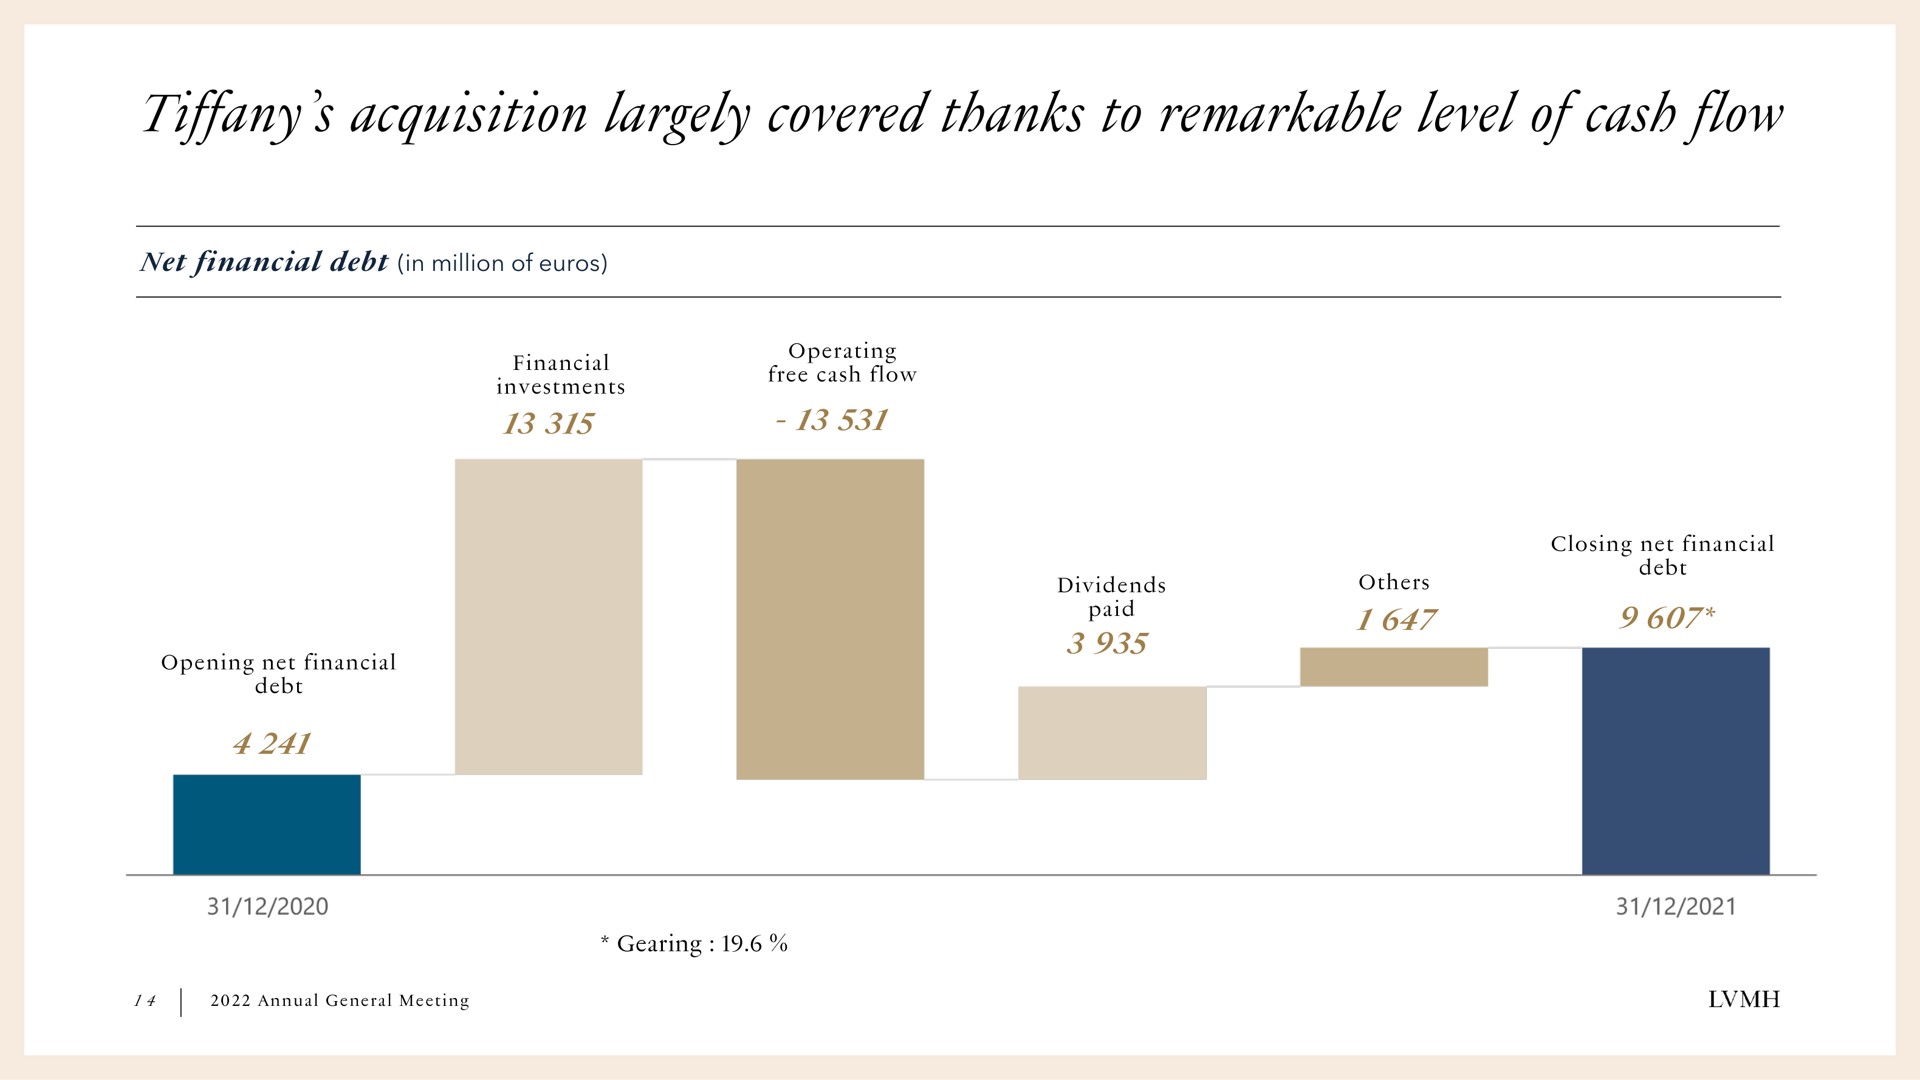 tiffany acquisition largely covered thanks to remarkable level of cash flow | LVMH